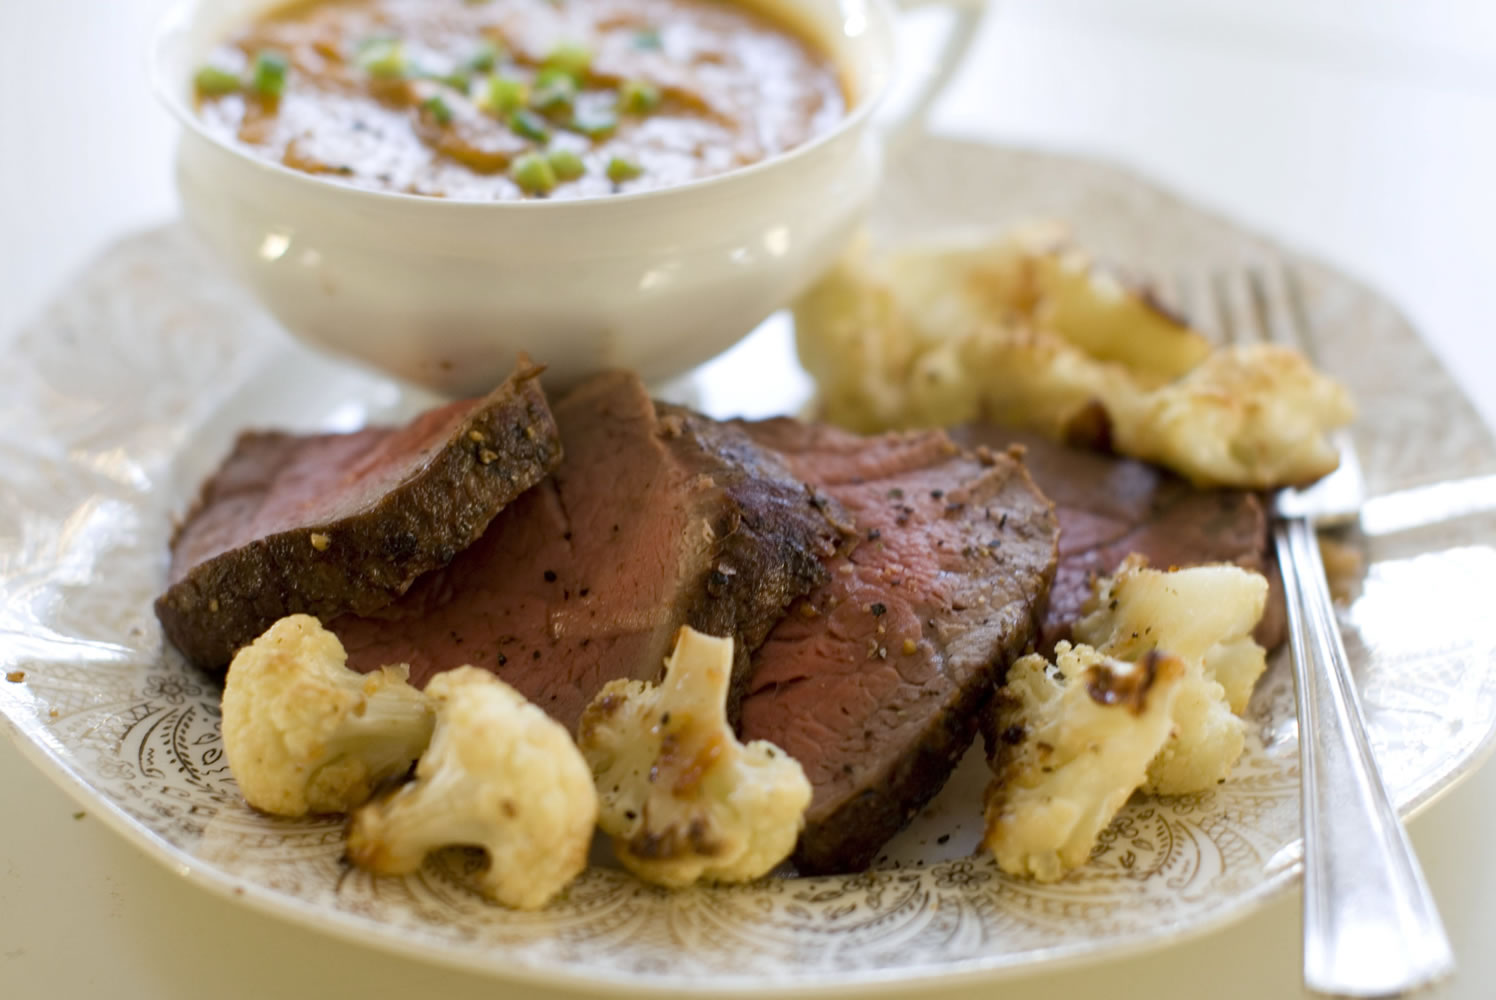 Spiced Carrot Soup and Peppered Filet Roasted With Parmesan Roasted Cauliflower